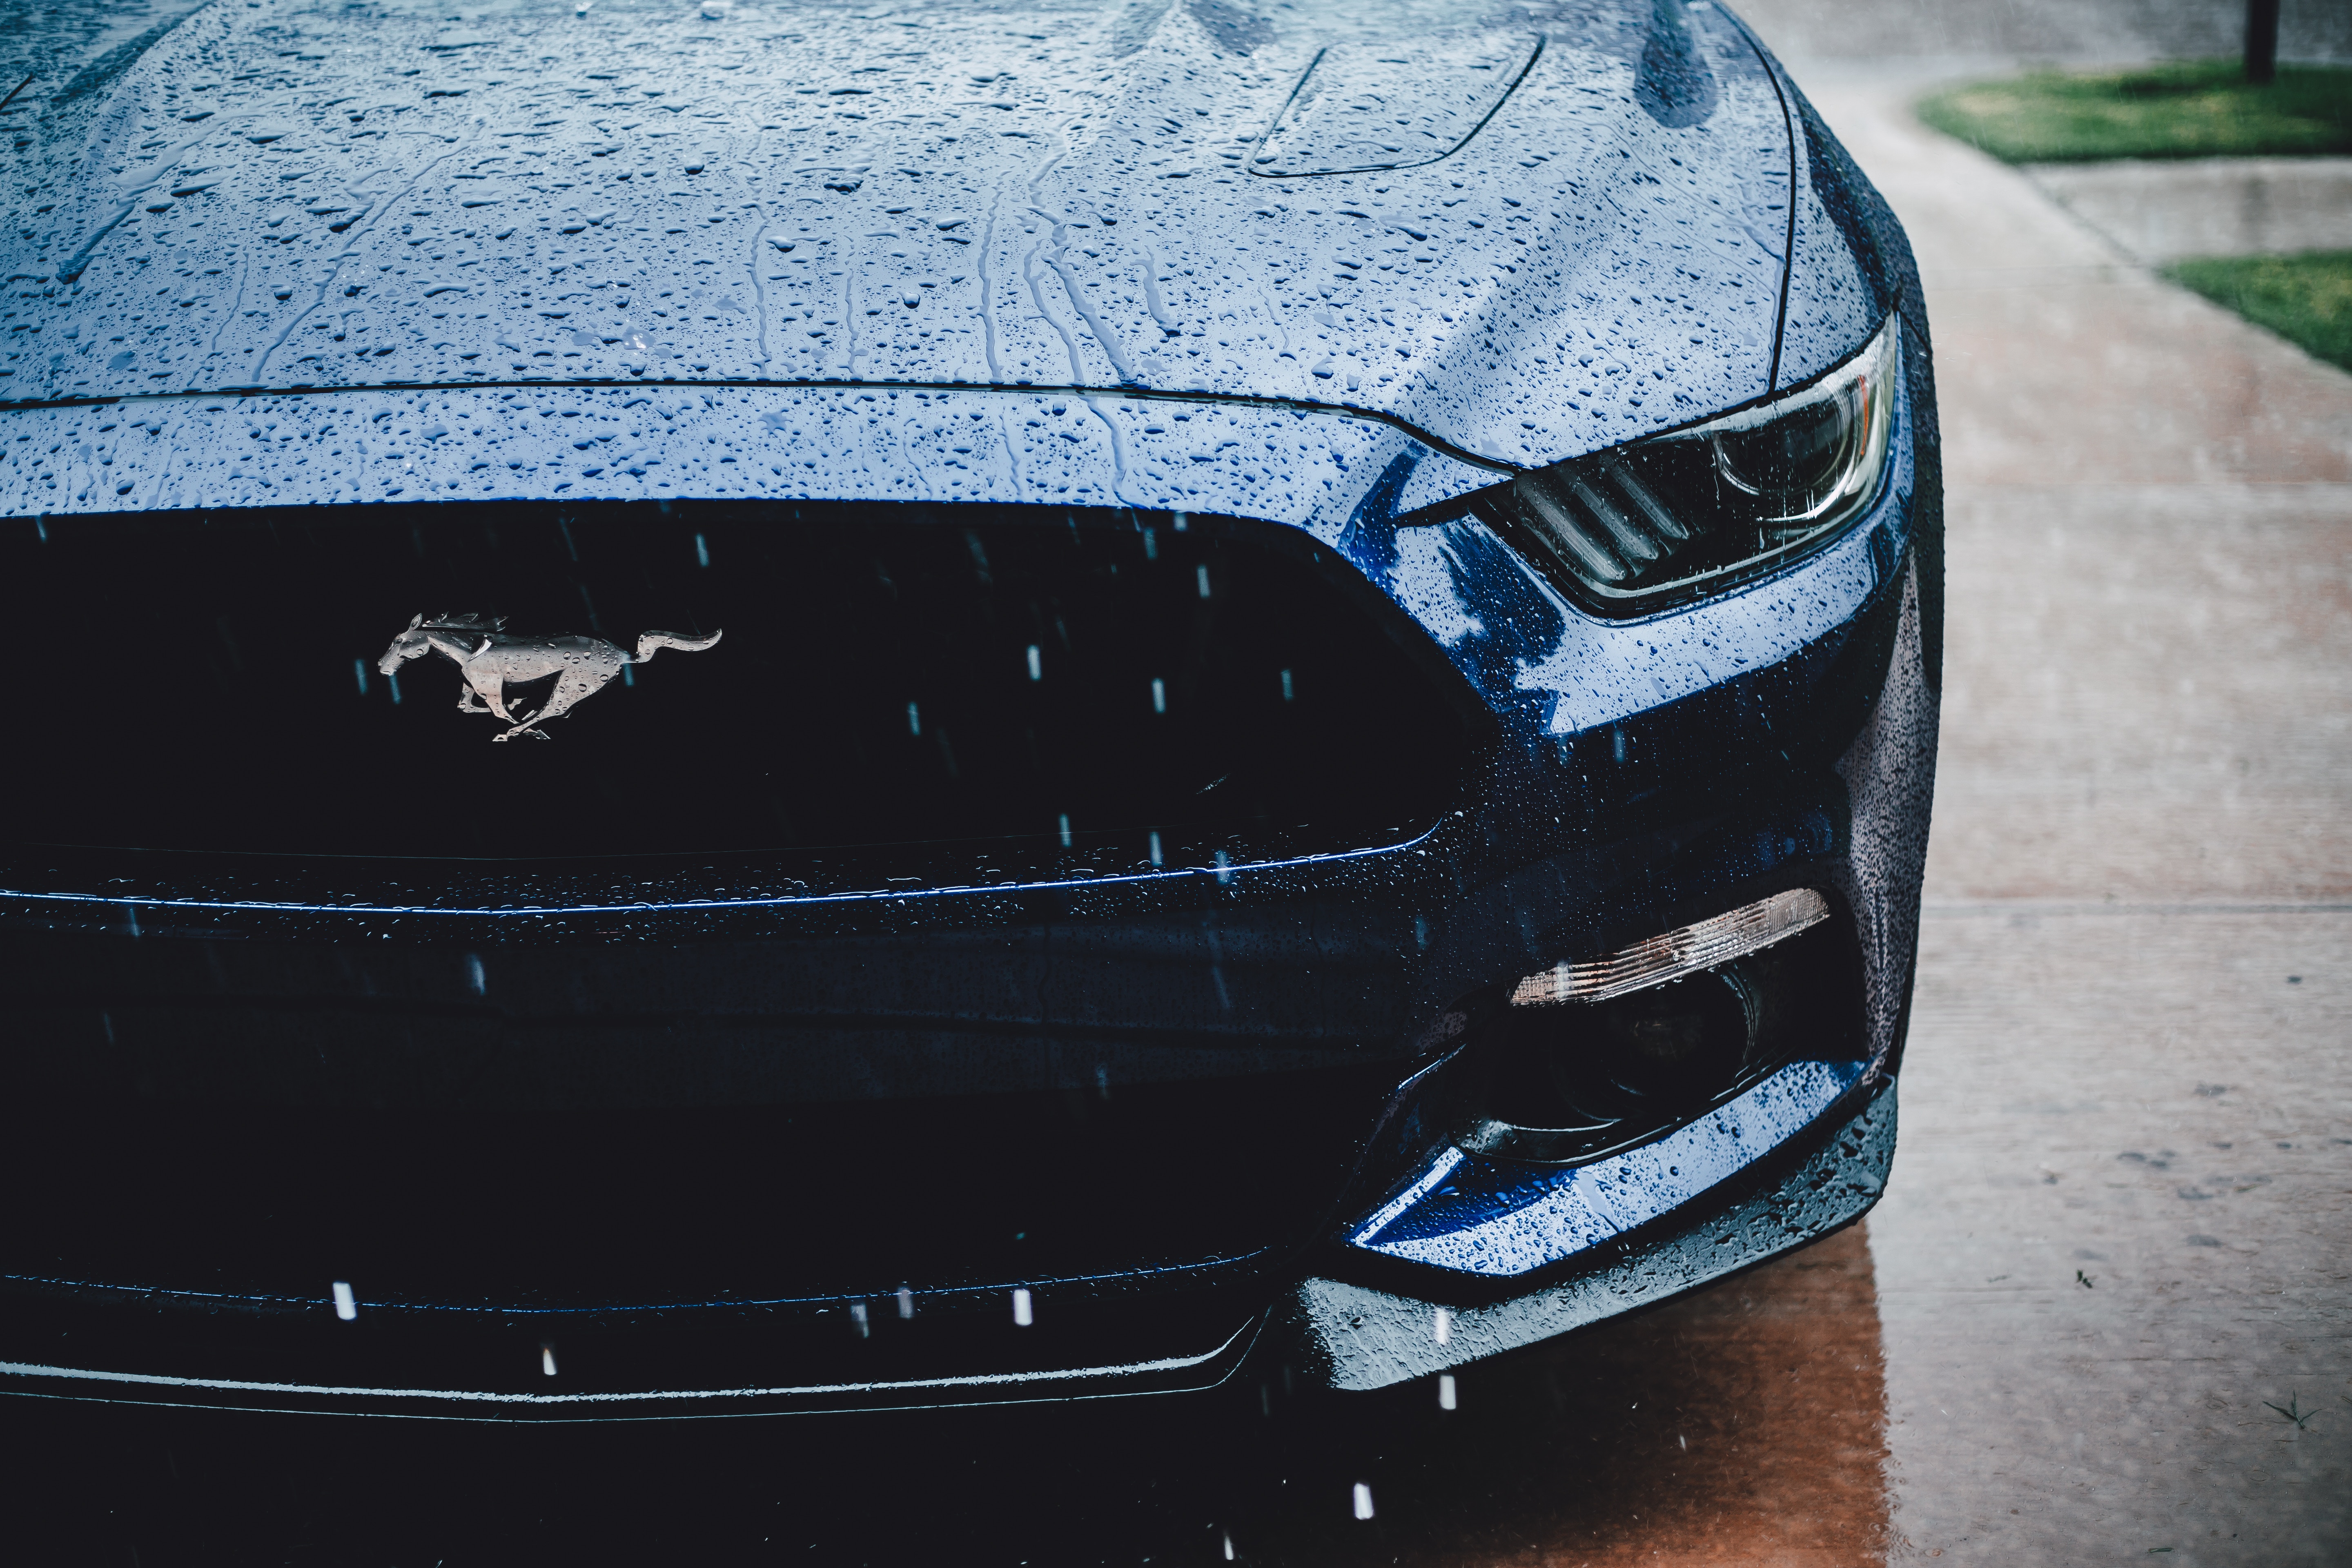 ford mustang, cars, rain, front view, headlight